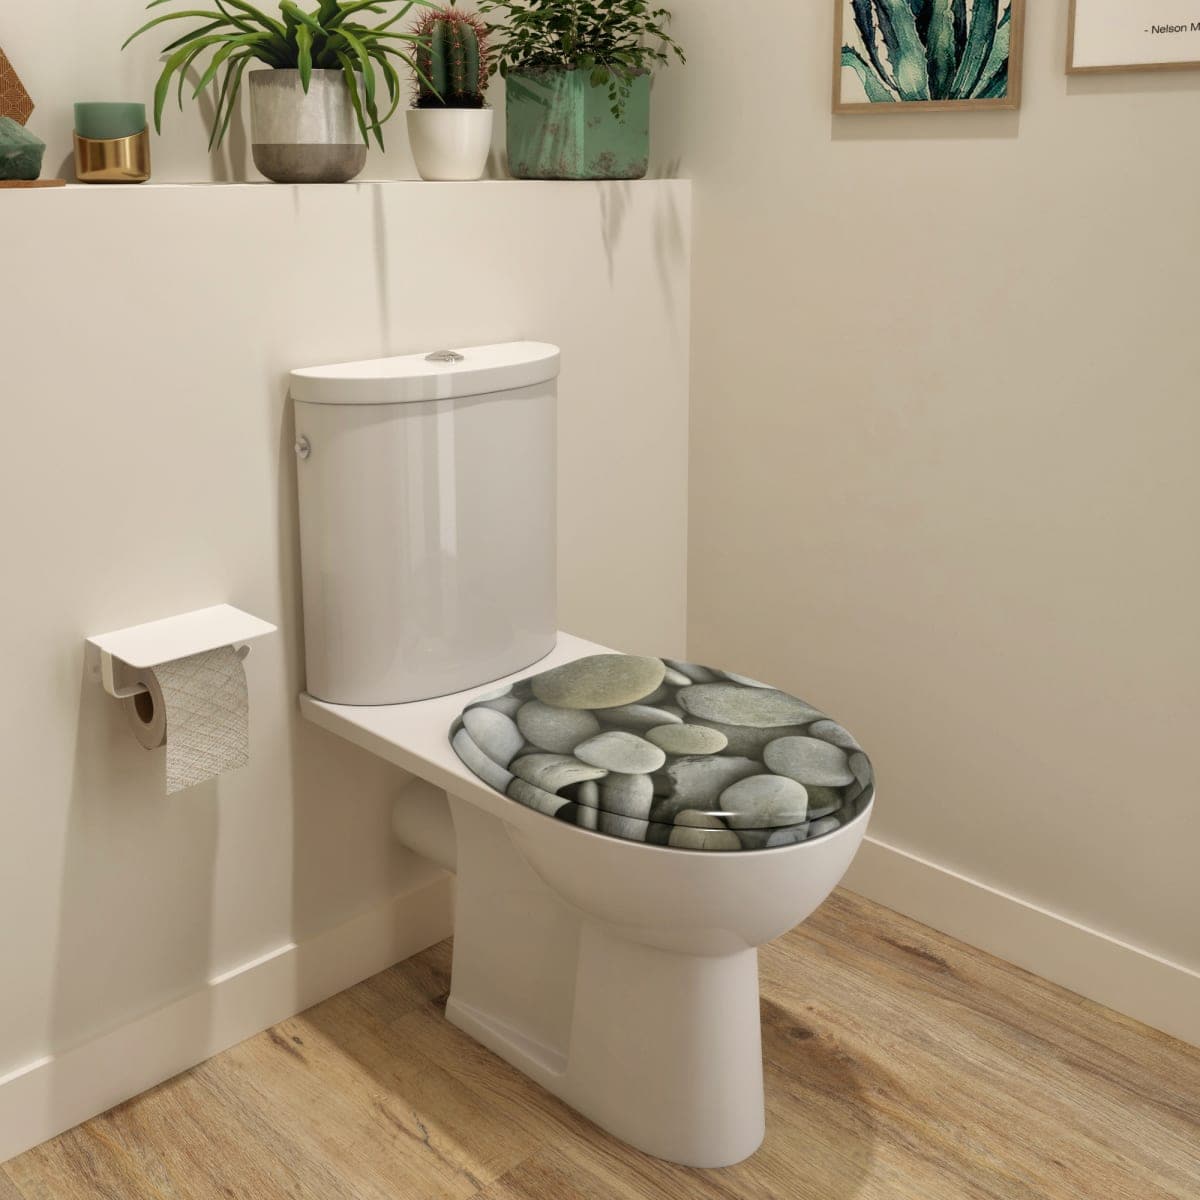 POP OVAL WC SEAT - GREY STONE PRINT WITH SLOW CLOSING MECHANISM - best price from Maltashopper.com BR430007091